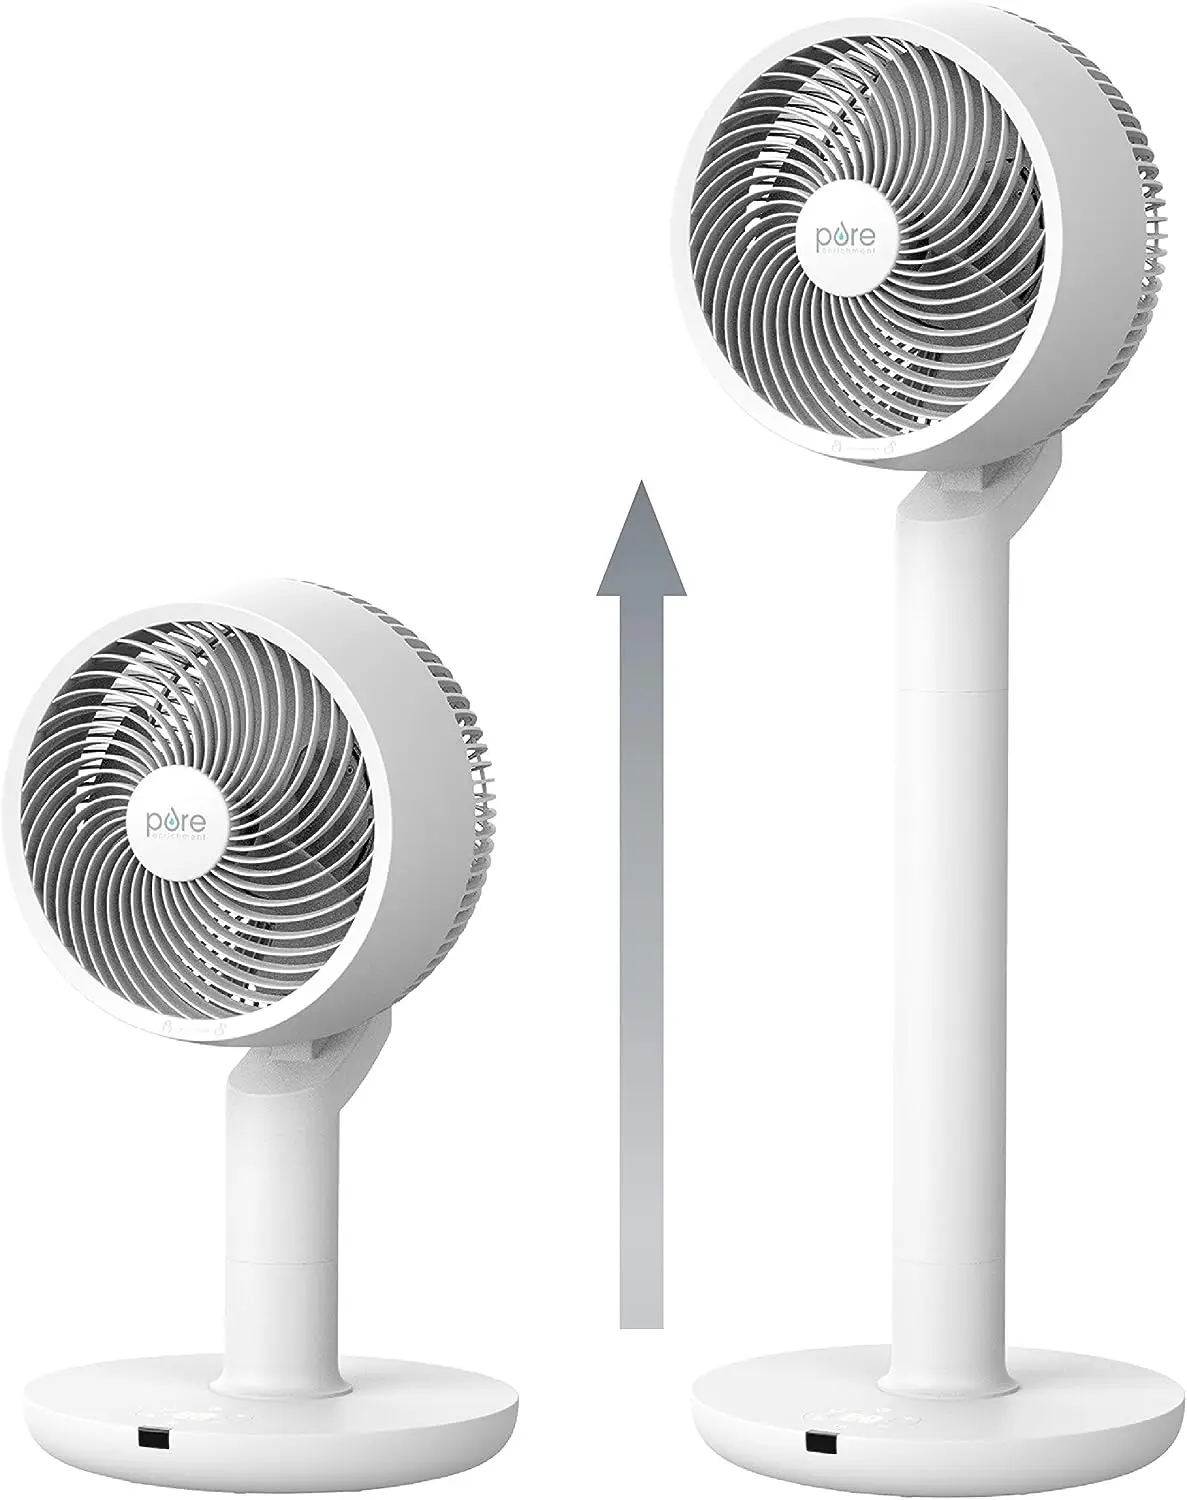 

2-in-1 Circulating Floor & Desk Fan - 24 Fan Speeds, Vertical and Horizontal Oscillation, Optional Remote Control Operation,